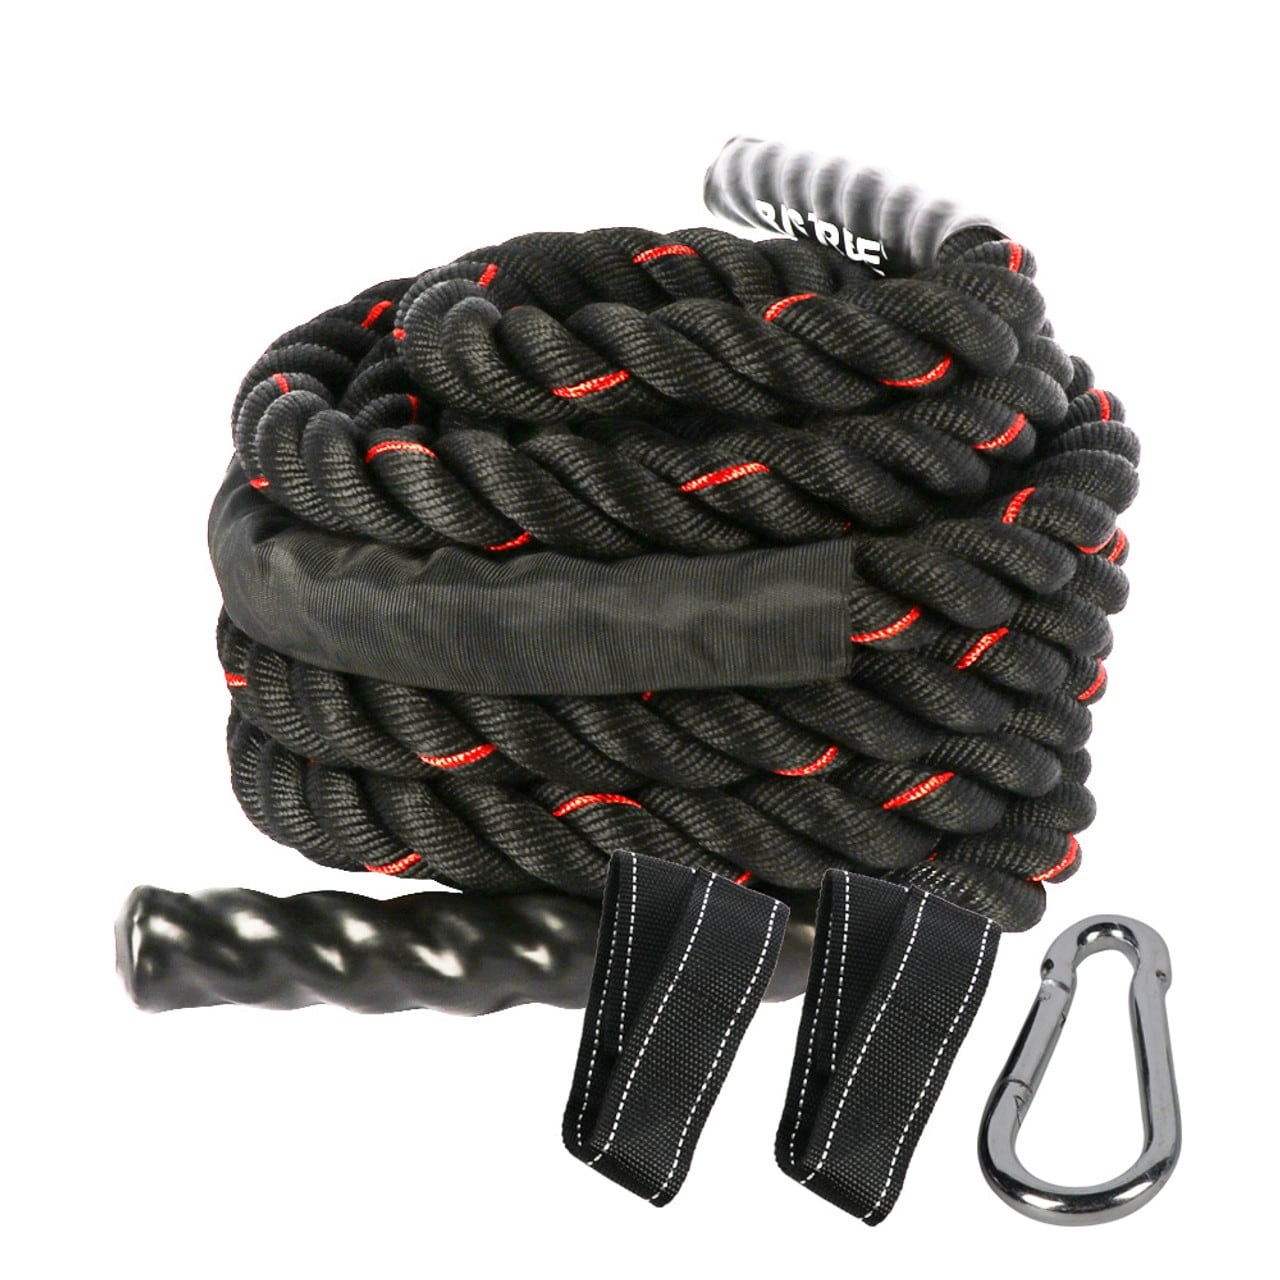 1.5 Battle Rope Mount Kit Crossfit Workout Red